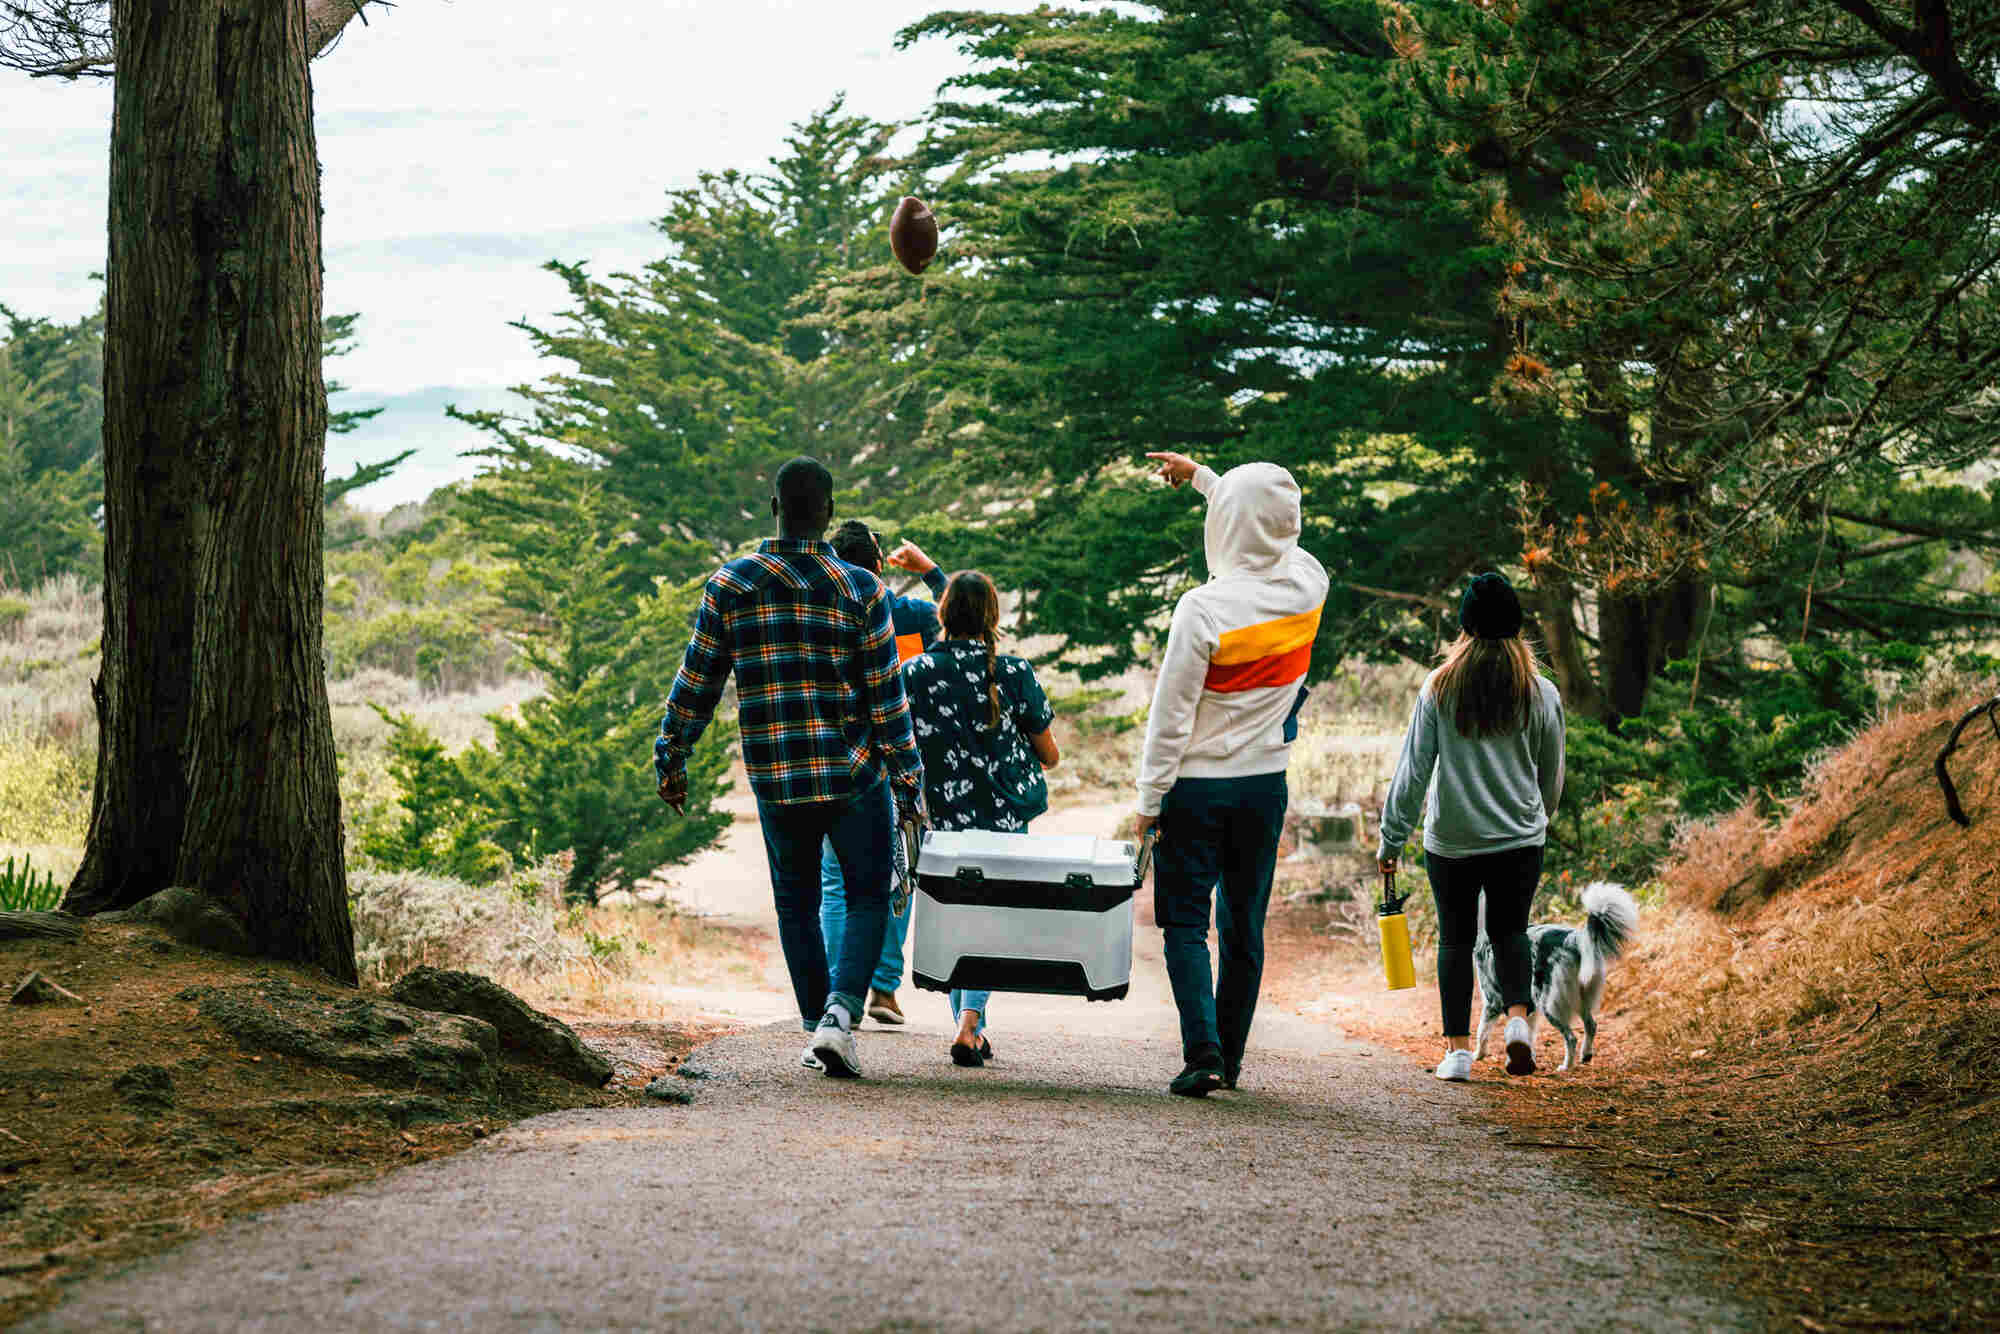 group of people carrying a cooler on a hike